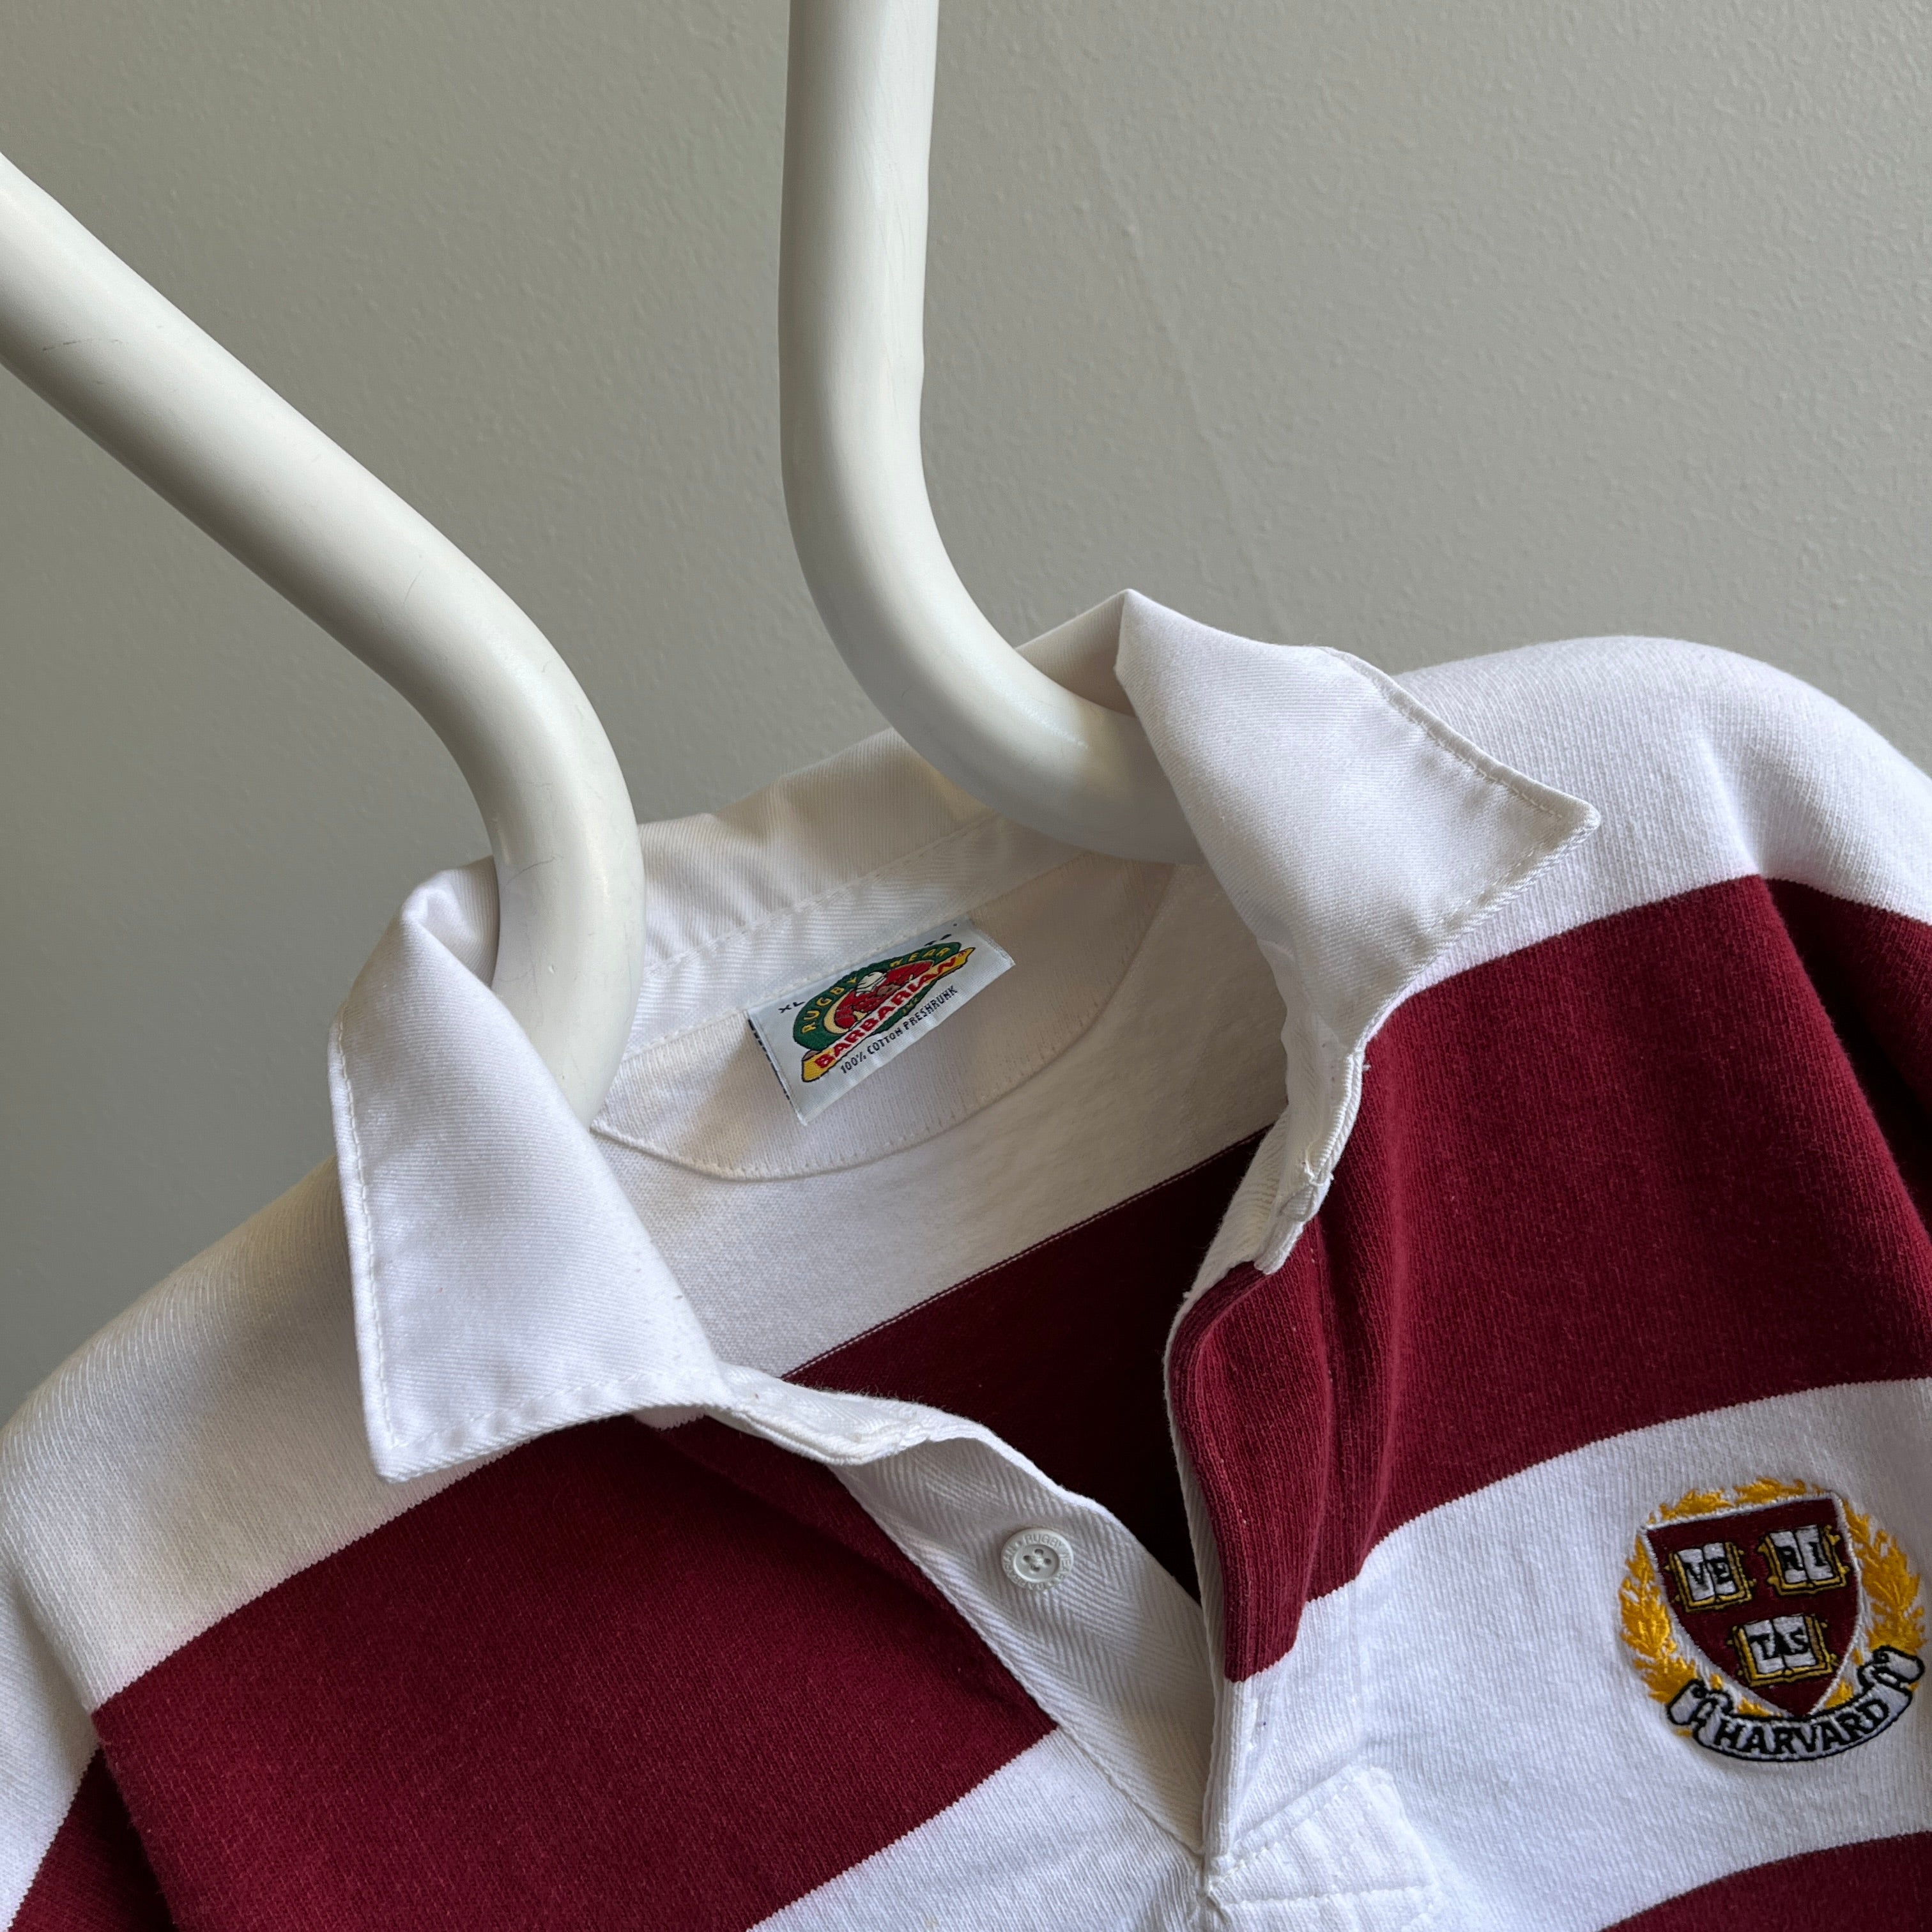 1990s Harvard University Rugby Shirt by Barbarian - !!!!!